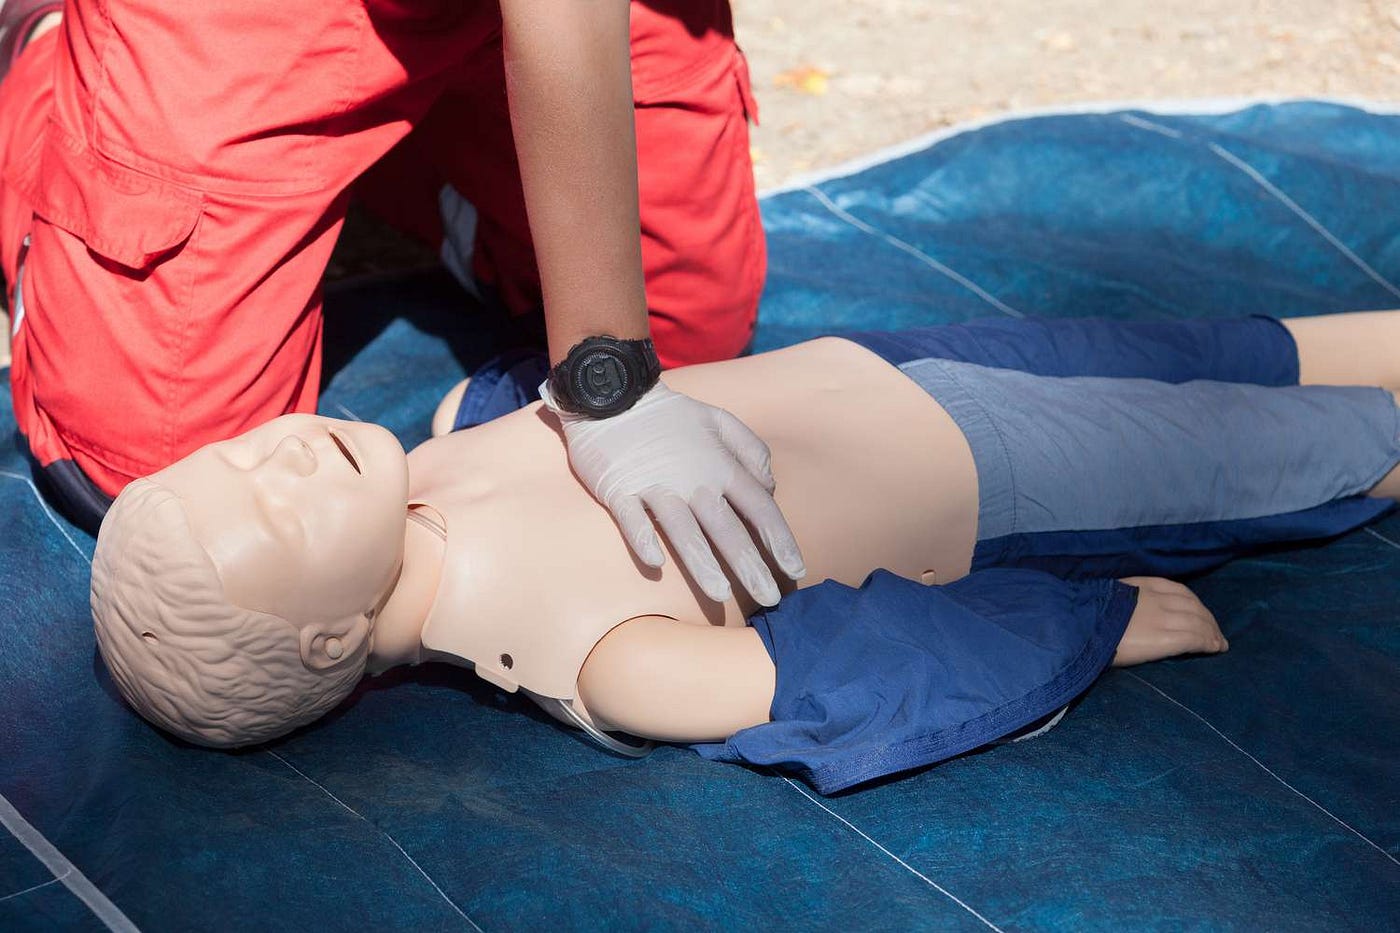 CPR Chest Compressions: Techniques for Effective Lifesaving